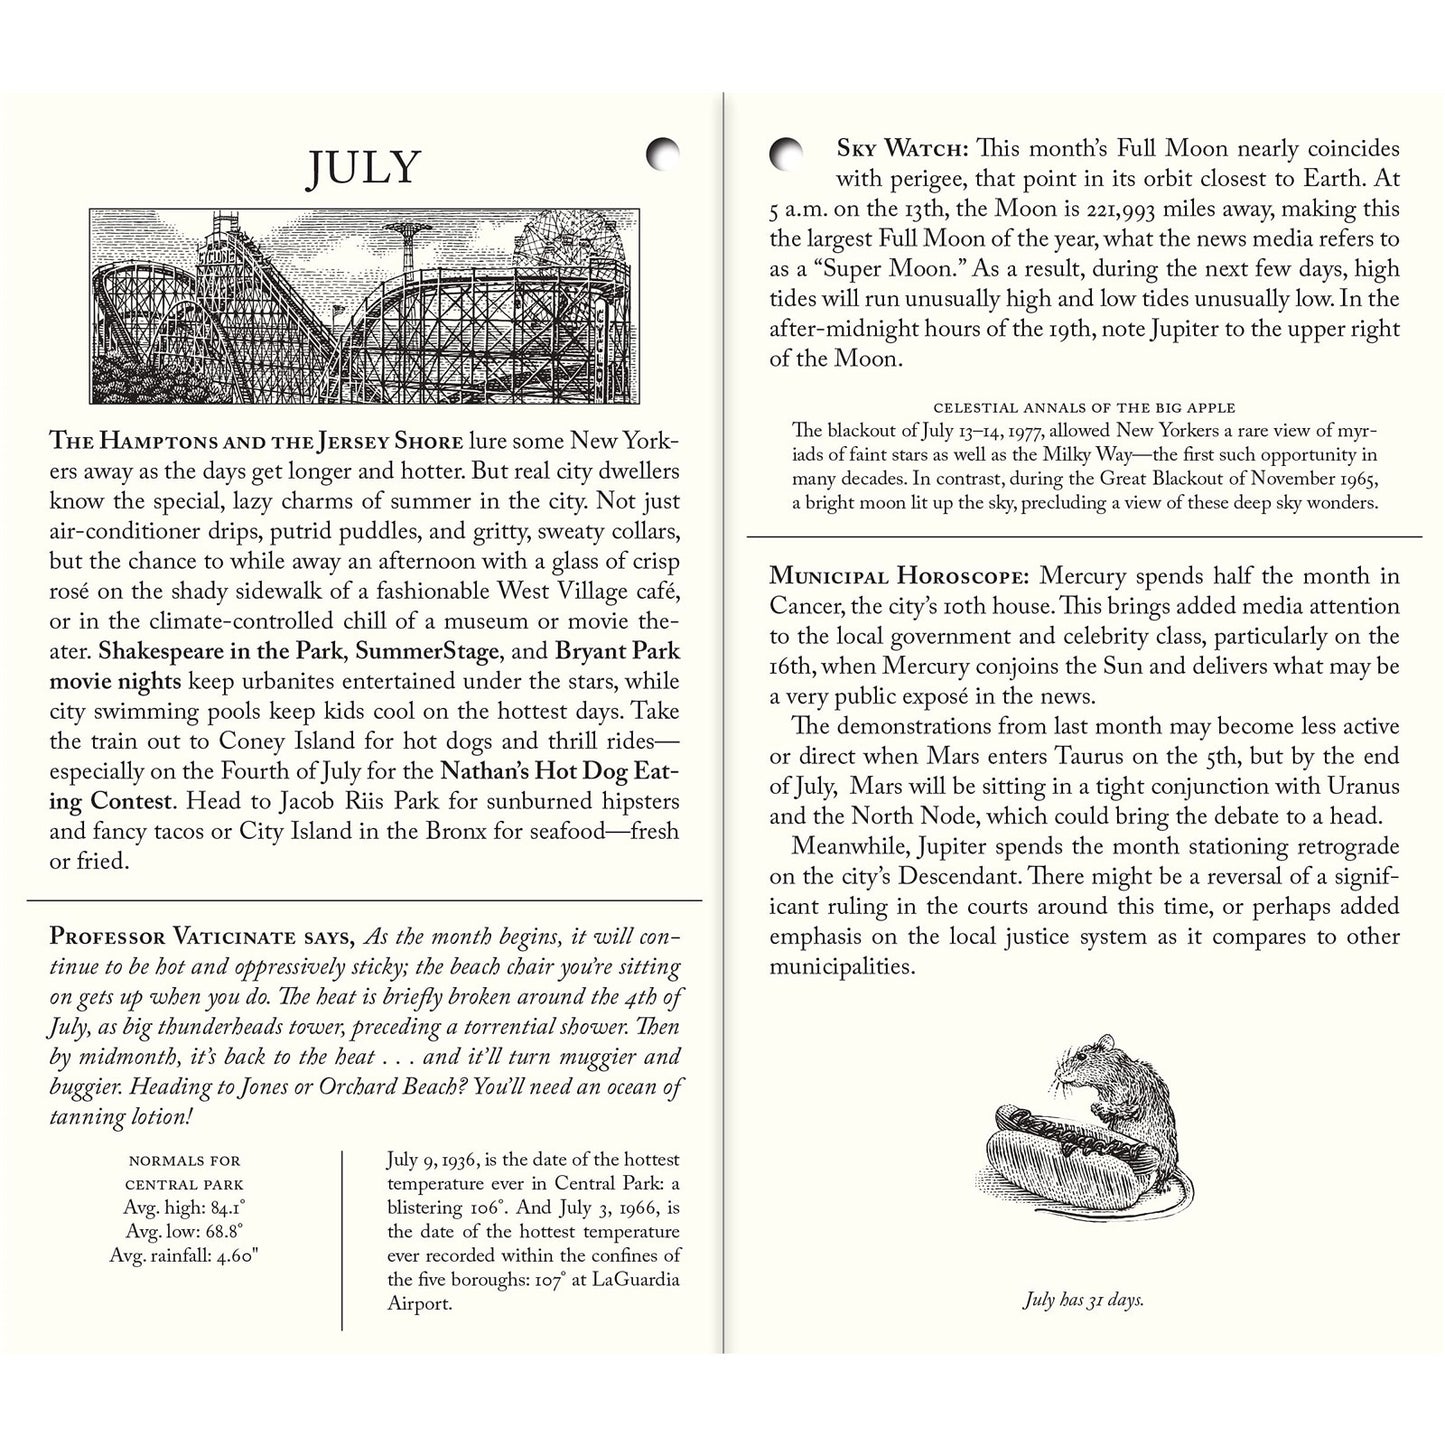 An Almanac of New York City for the Year 2022